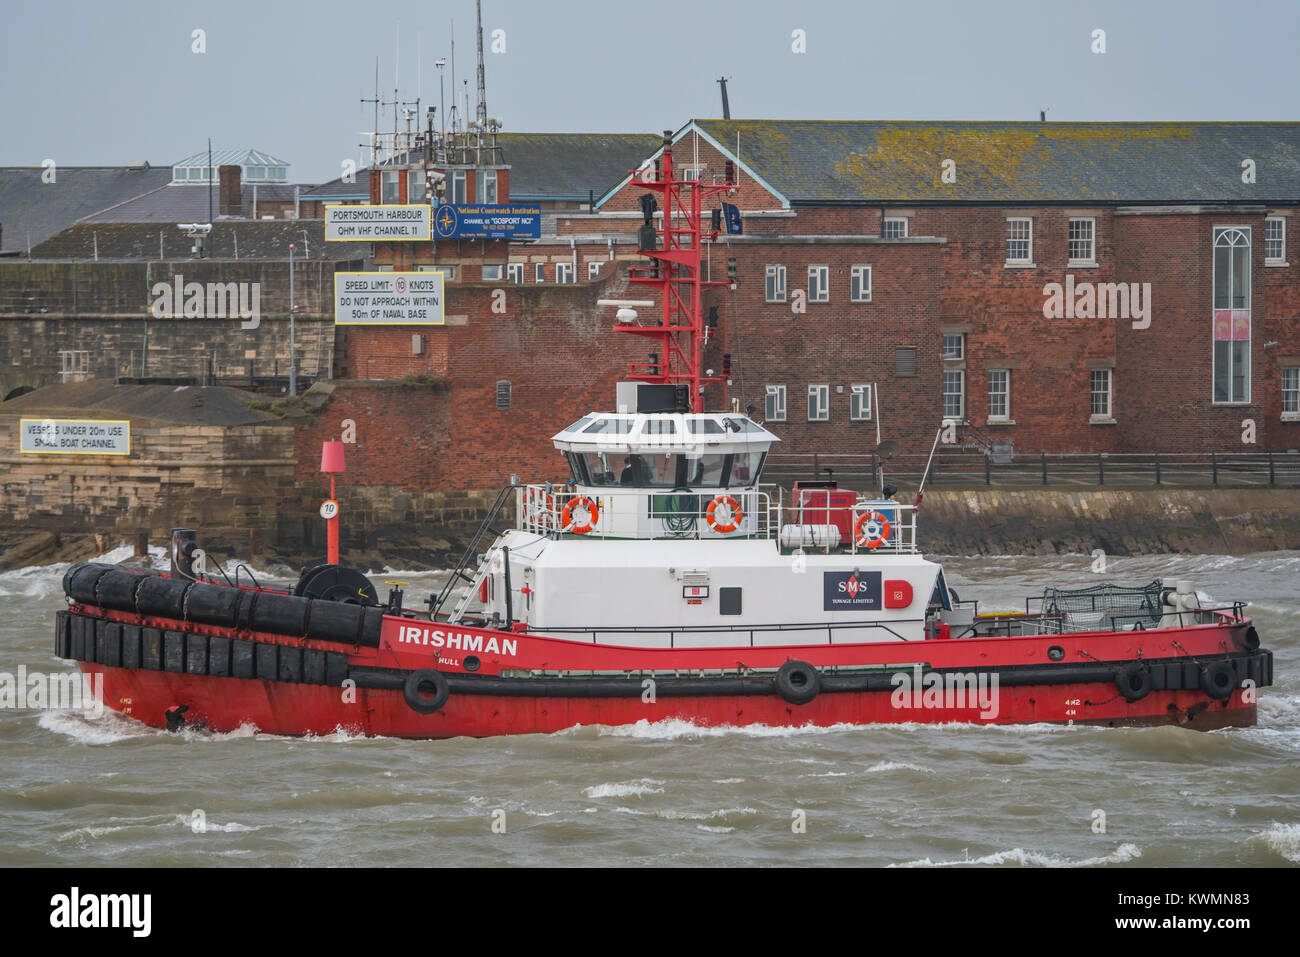 Portsmouth, UK. 4th January 2018. SMS Towage now provide commercial towing services at Portsmouth International Port, Portsmouth, UK. Tugs Guardsman and Irishman are on call to assist merchant vessels in and out of port. Credit: Neil Watkin / Alamy Live News Stock Photo